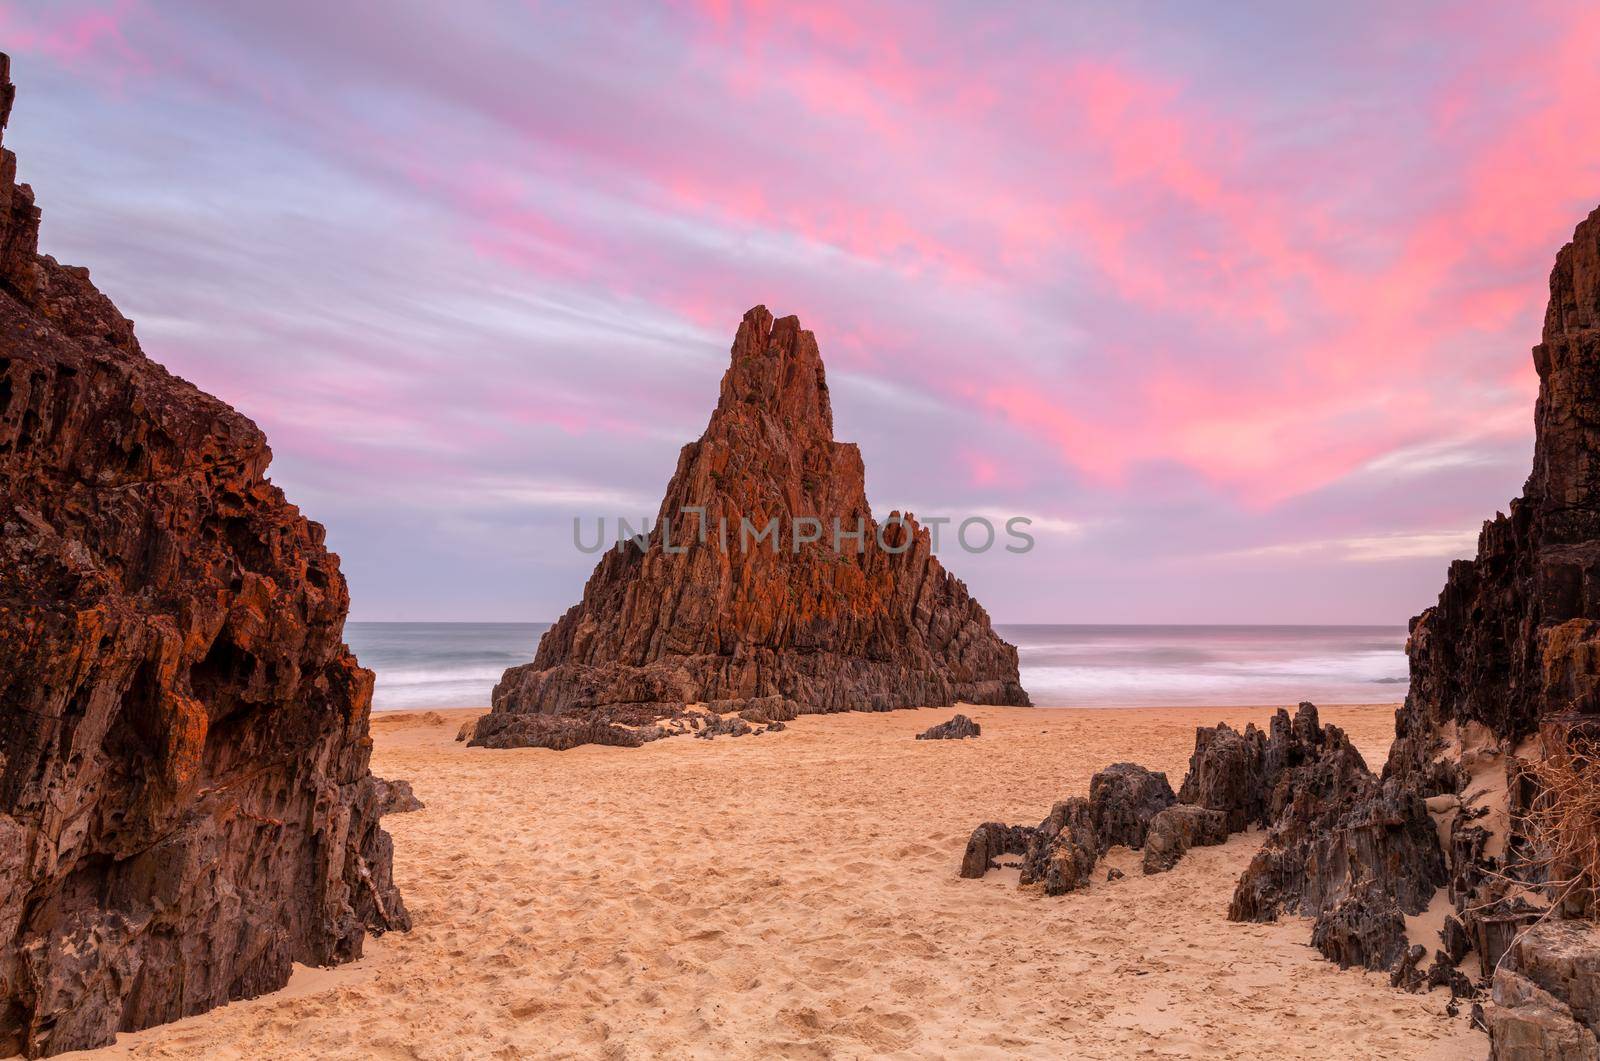 Pretty pastel sunset at the Pyramid rock in the remote south coast of NSW Australia